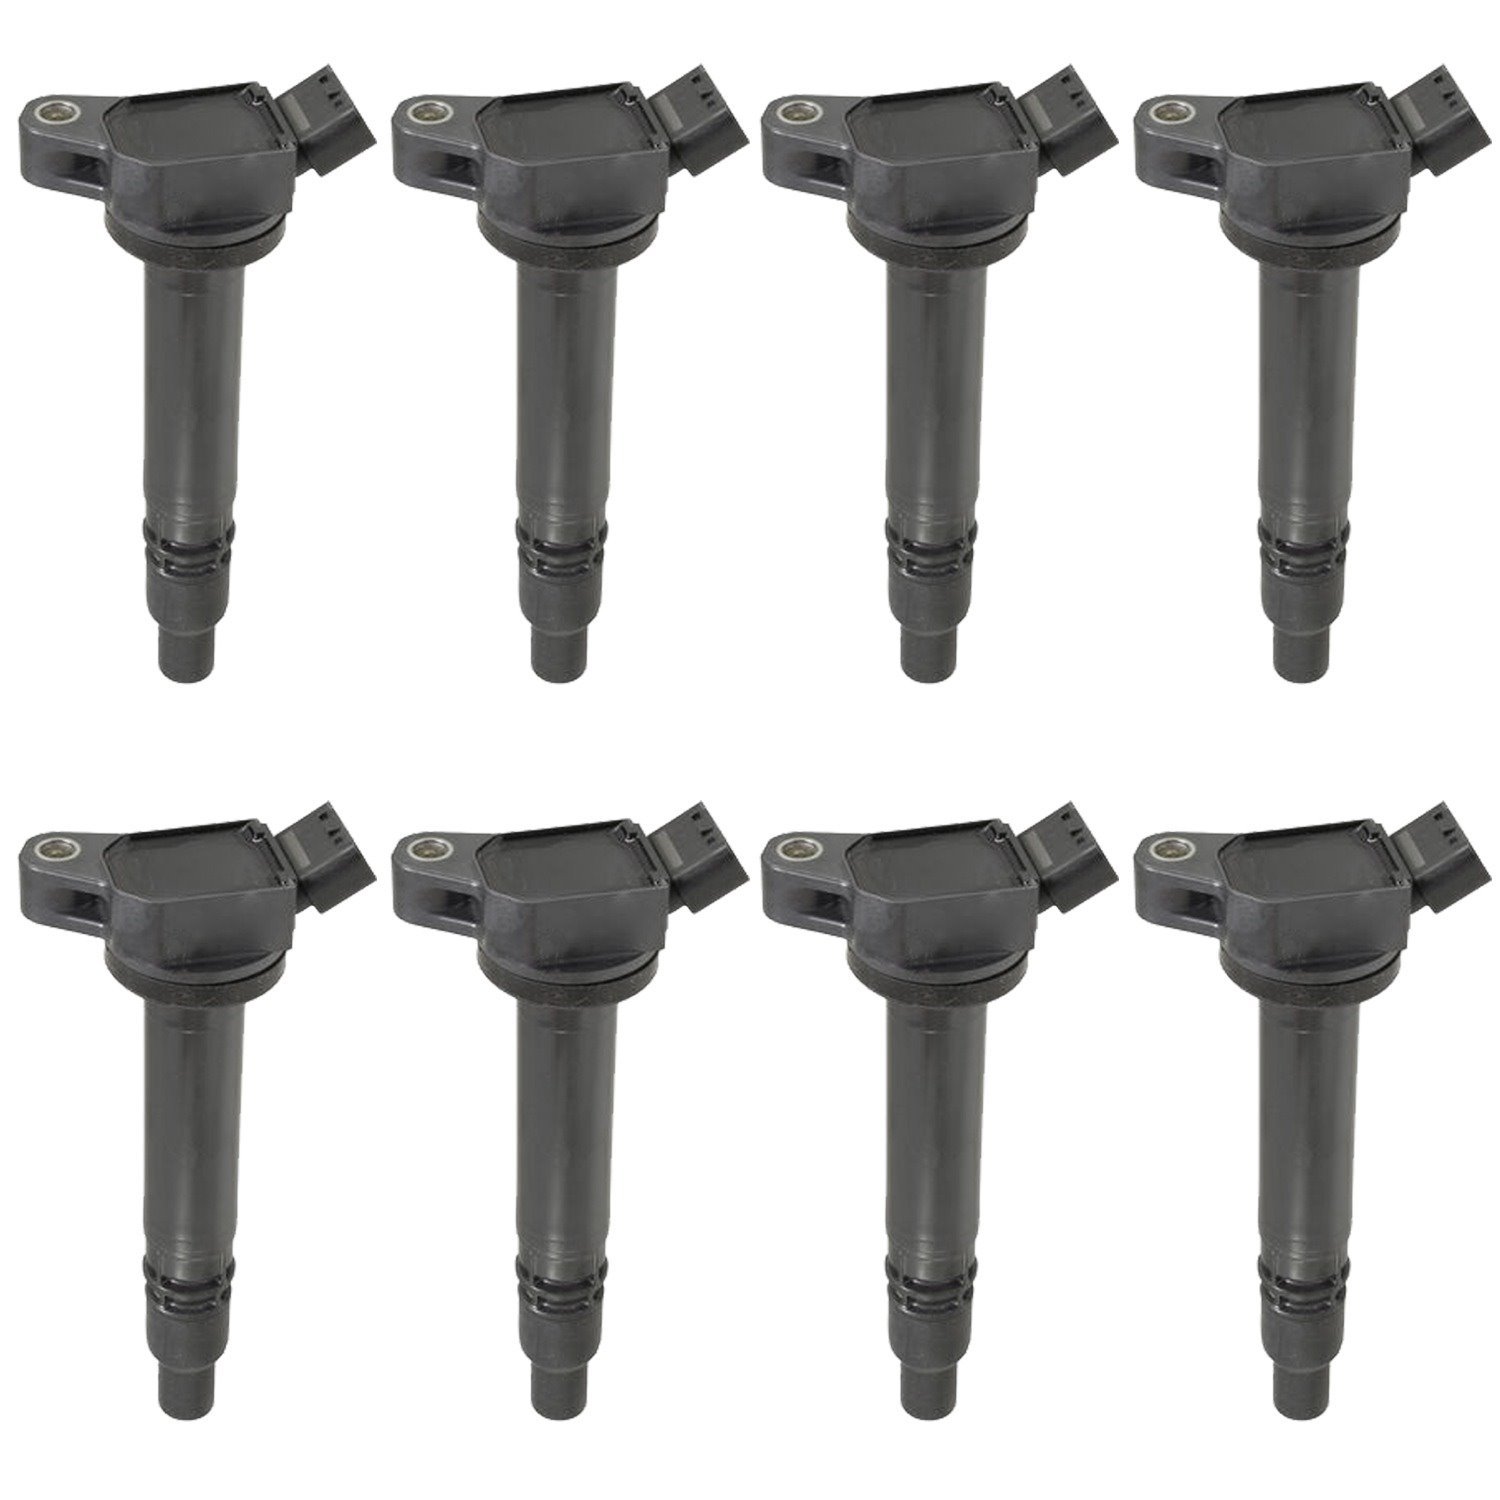 OE Replacement Ignition Coils for 2006-2015 Lexus IS250 2.5L